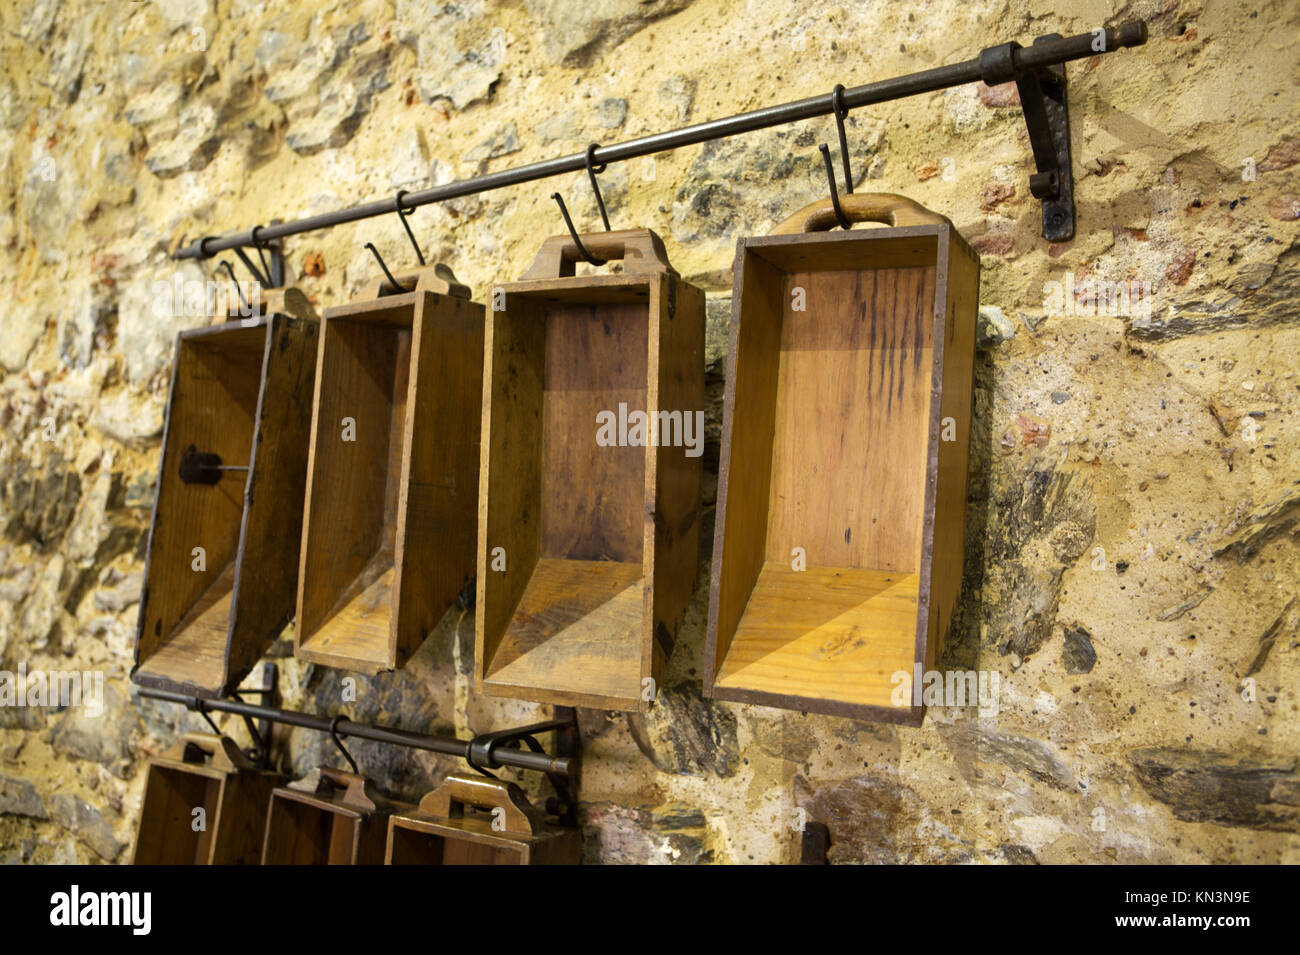 Bushels or celemins. These objects were used primarily for measure grain and seed. Badajoz, Spain. Stock Photo